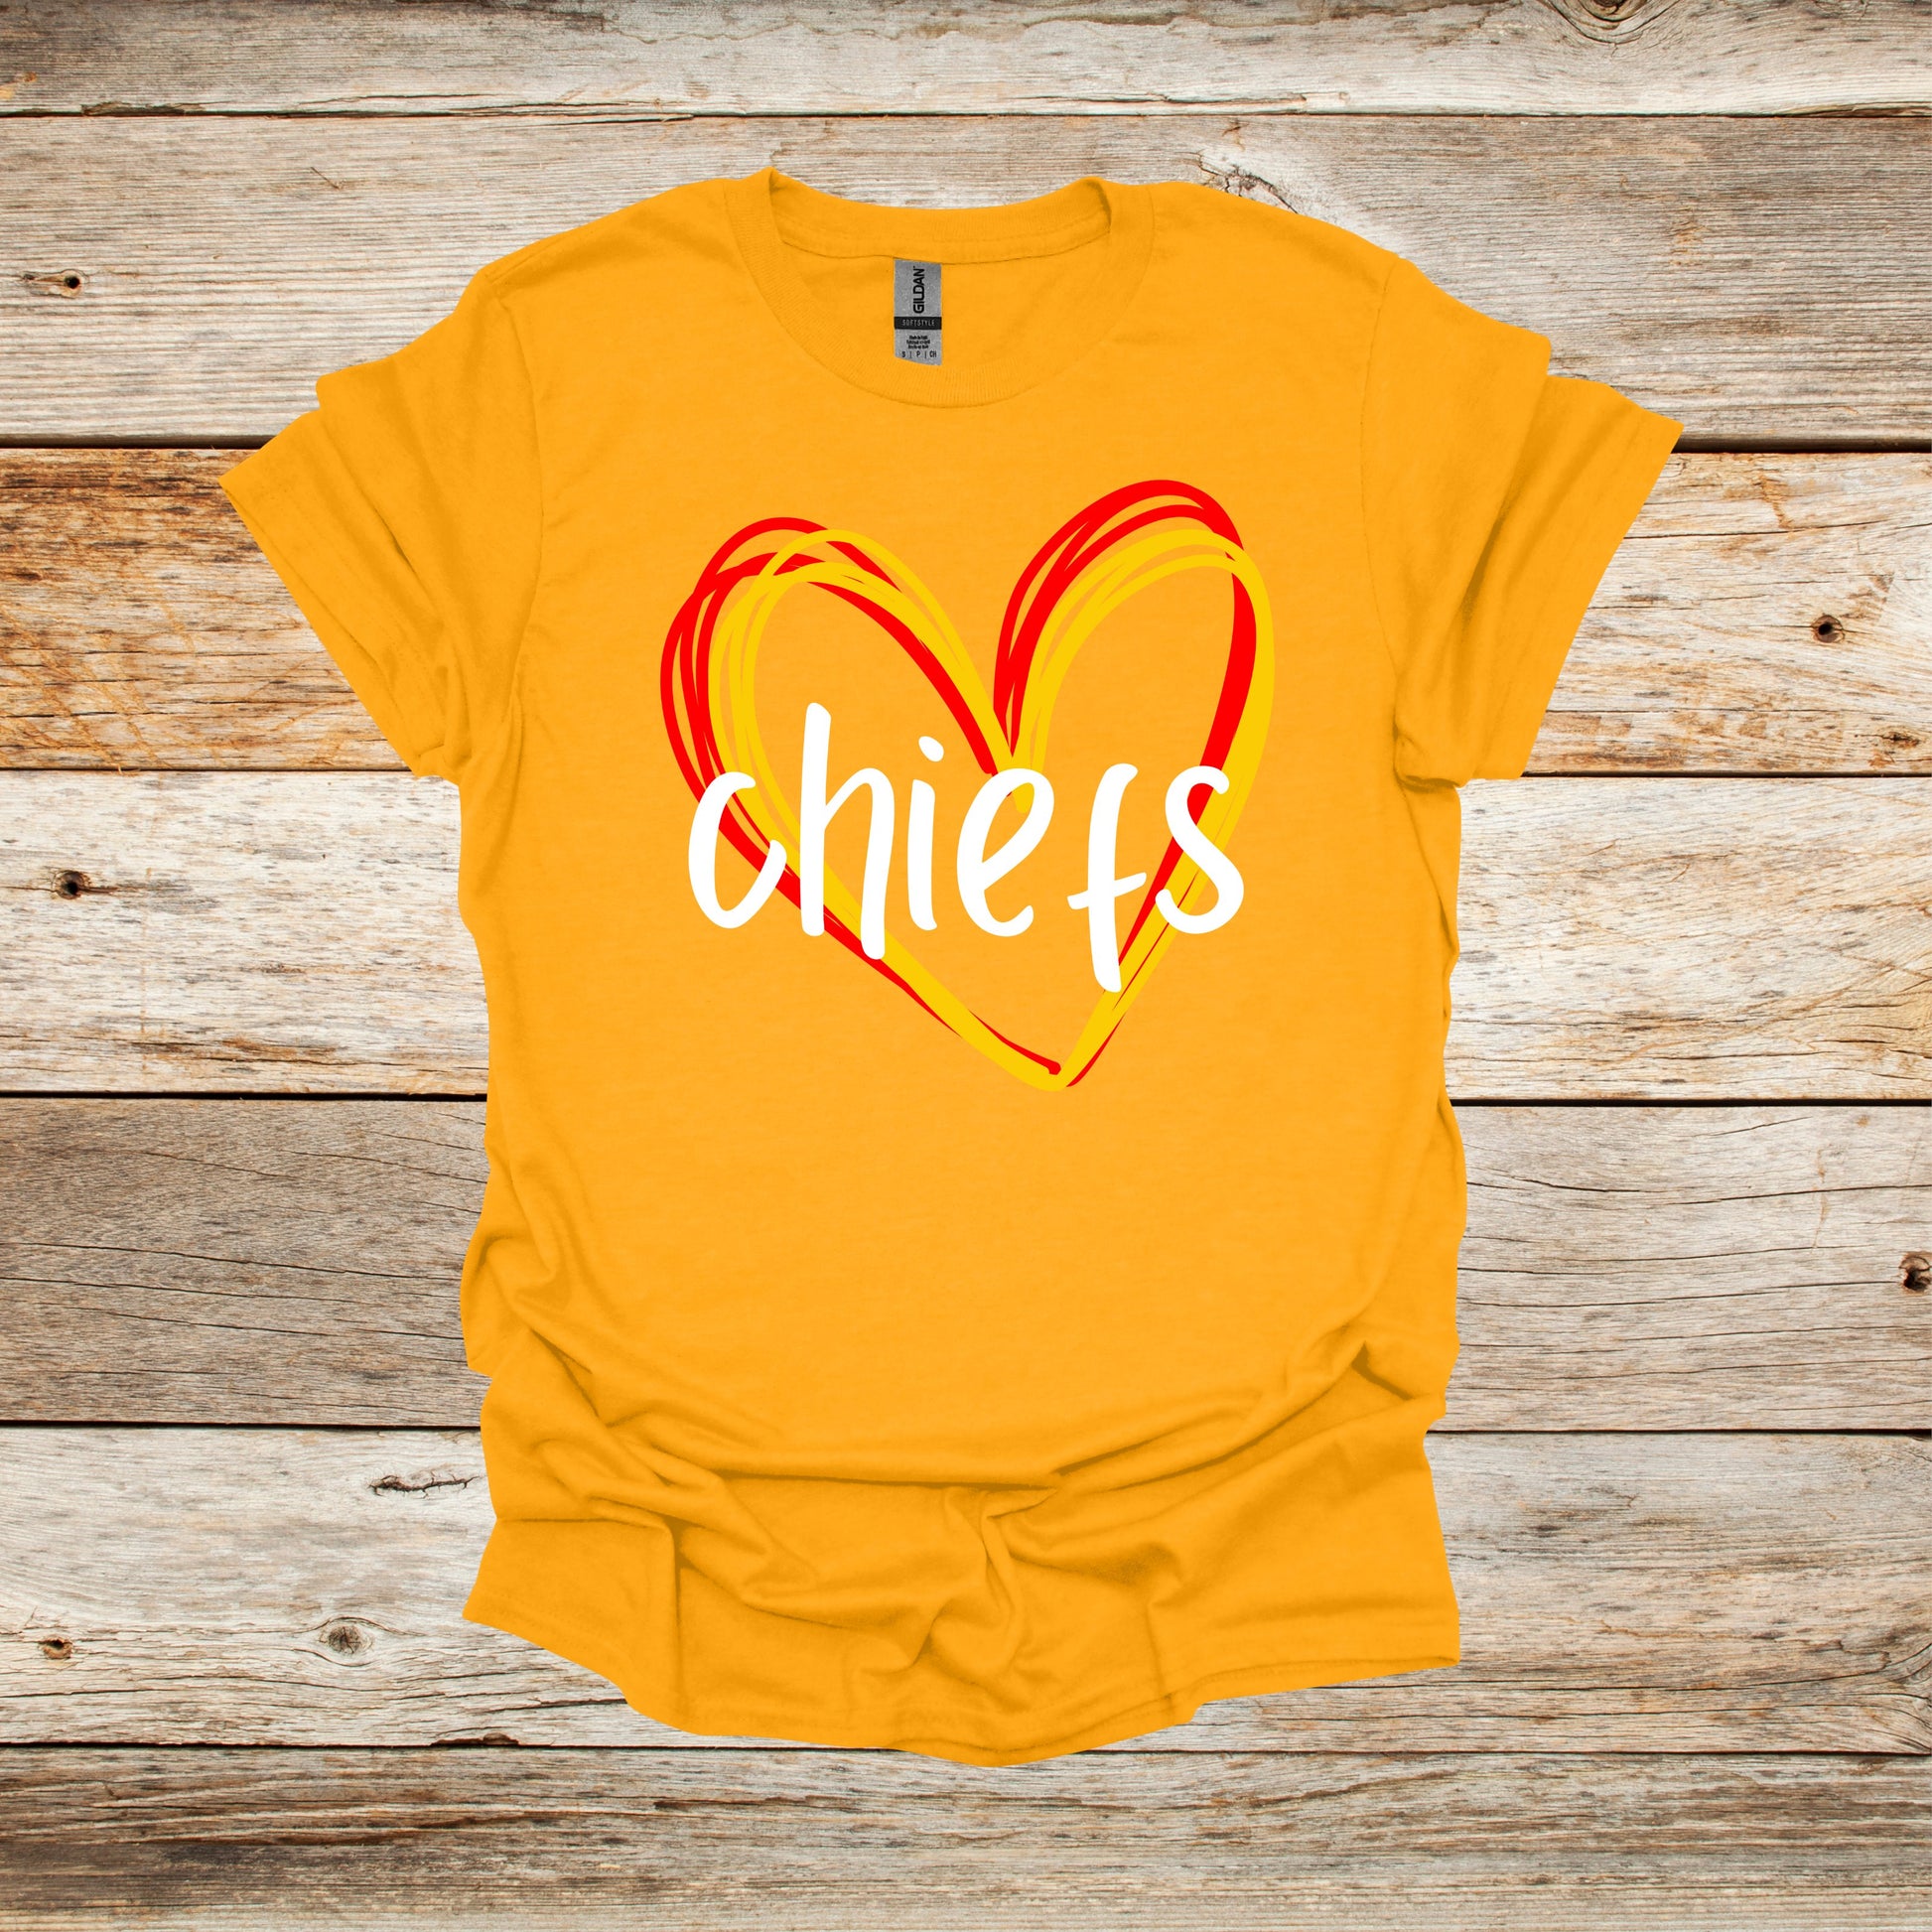 Football T-Shirt - Kansas City Chiefs - Adult and Children's Tee Shirts - Sports T-Shirts Graphic Avenue Gold Adult Small 